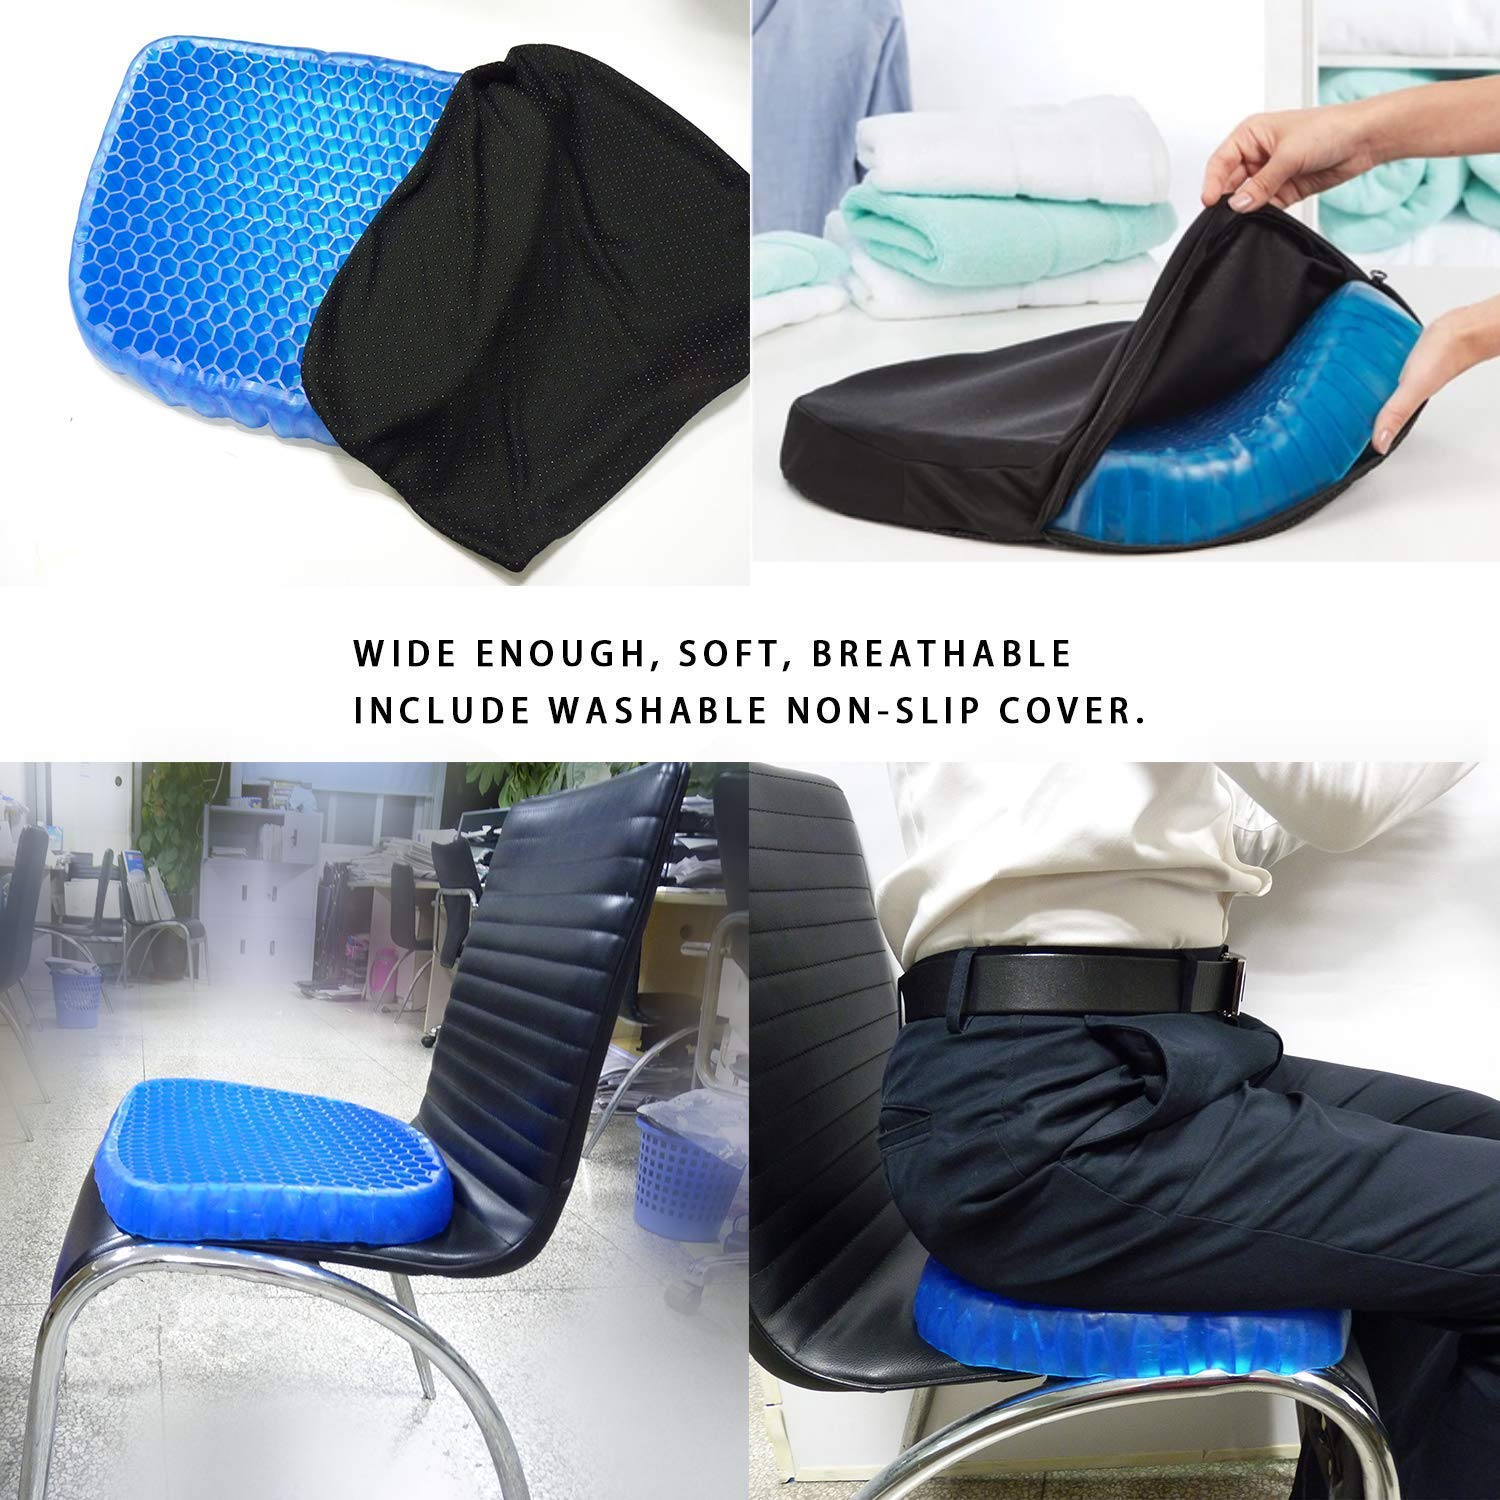 BulbHead Egg Sitter Seat Cushion with Non-Slip Cover, Breathable Honeycomb  Design Absorbs Pressure Points